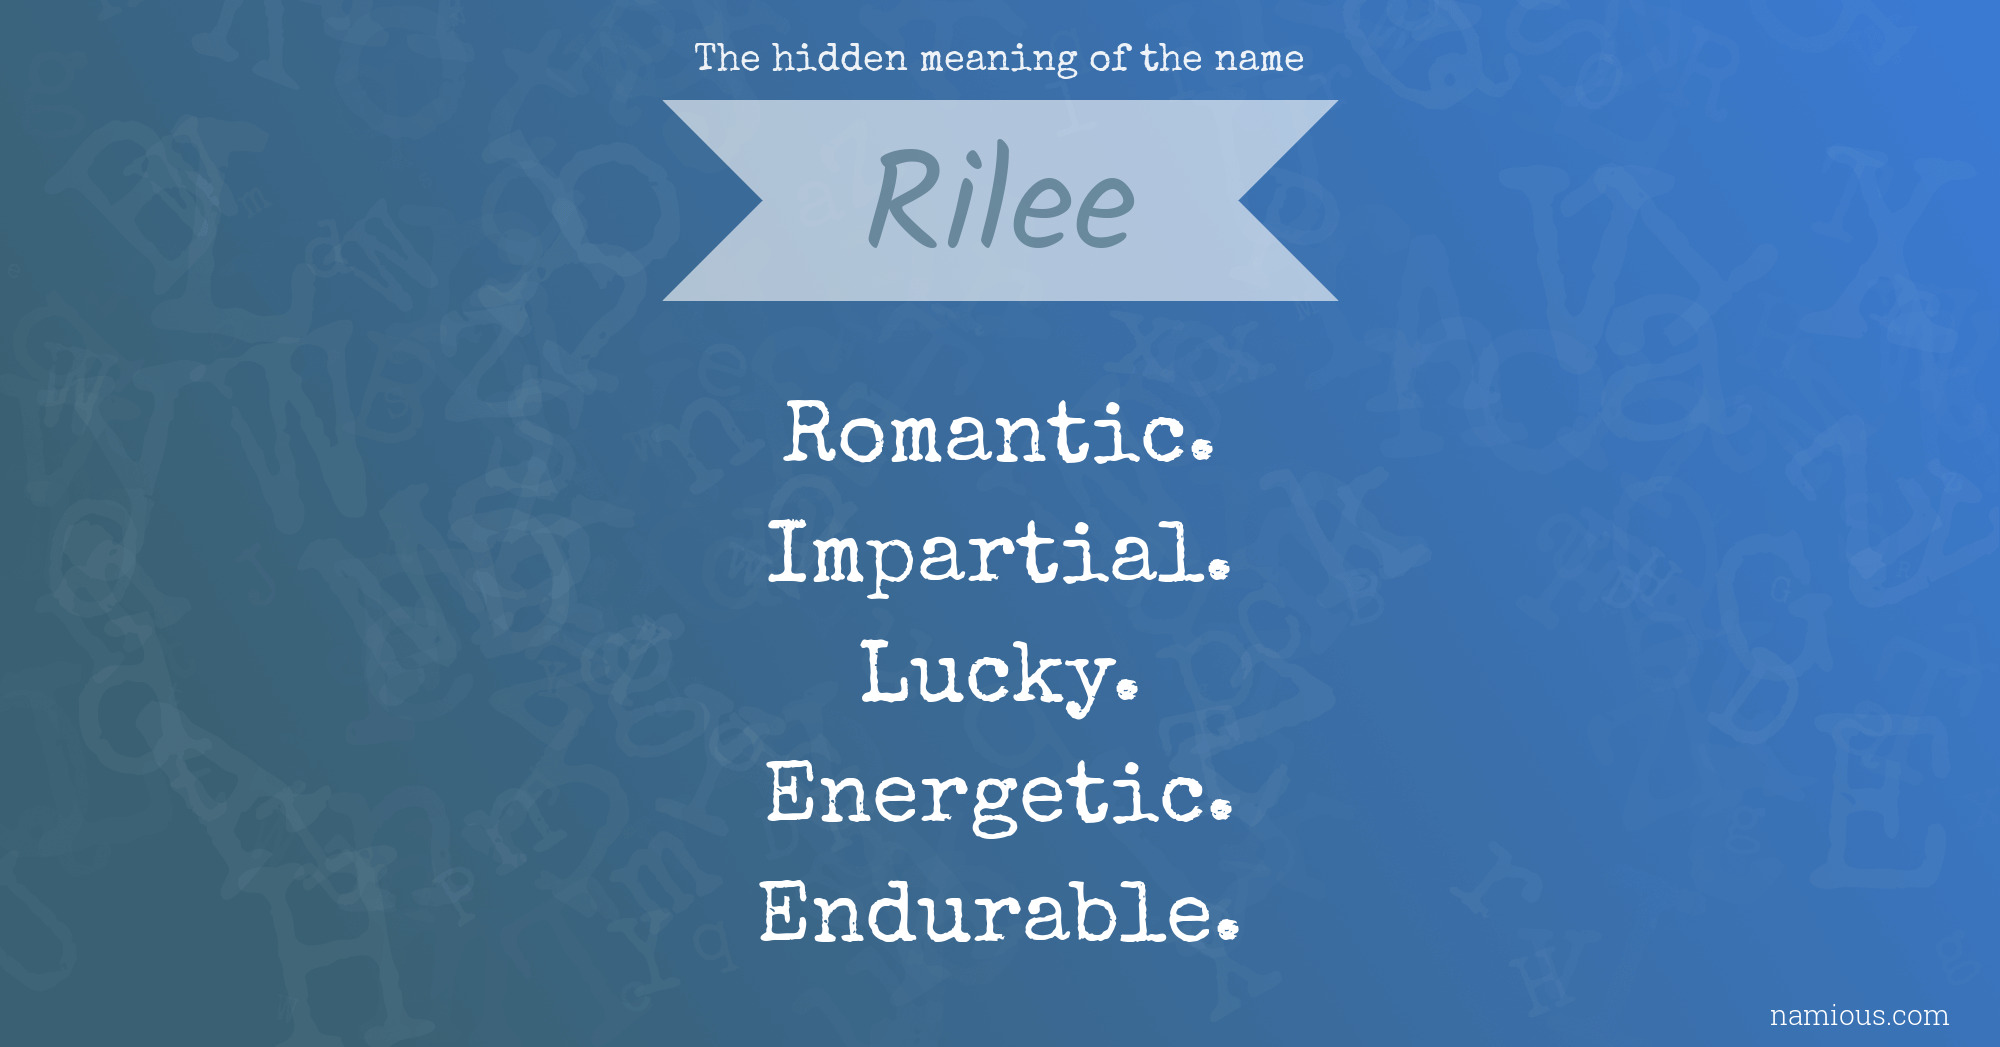 The hidden meaning of the name Rilee